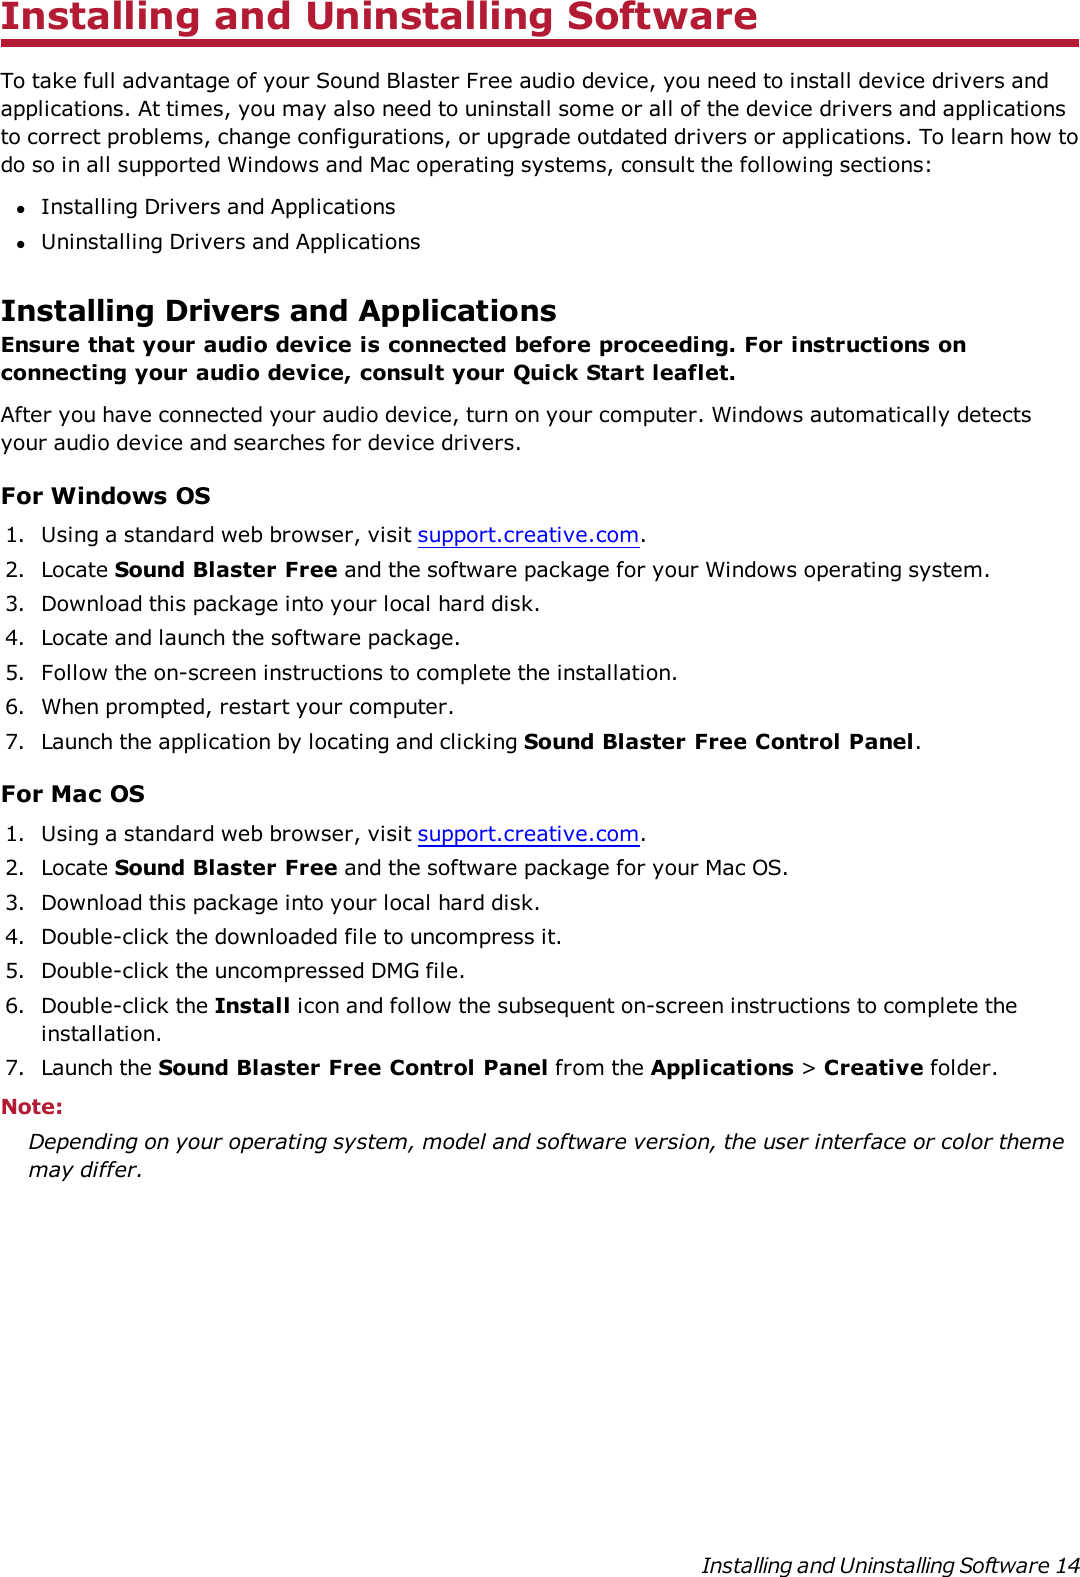 Installing and Uninstalling SoftwareTo take full advantage of your Sound Blaster Free audio device, you need to install device drivers andapplications. At times, you may also need to uninstall some or all of the device drivers and applicationsto correct problems, change configurations, or upgrade outdated drivers or applications. To learn how todo so in all supported Windows and Mac operating systems, consult the following sections:lInstalling Drivers and ApplicationslUninstalling Drivers and ApplicationsInstalling Drivers and ApplicationsEnsure that your audio device is connected before proceeding. For instructions onconnecting your audio device, consult your Quick Start leaflet.After you have connected your audio device, turn on your computer. Windows automatically detectsyour audio device and searches for device drivers.For Windows OS1. Using a standard web browser, visit support.creative.com.2. Locate Sound Blaster Free and the software package for your Windows operating system.3. Download this package into your local hard disk.4. Locate and launch the software package.5. Follow the on-screen instructions to complete the installation.6. When prompted, restart your computer.7. Launch the application by locating and clicking Sound Blaster Free Control Panel.For Mac OS1. Using a standard web browser, visit support.creative.com.2. Locate Sound Blaster Free and the software package for your Mac OS.3. Download this package into your local hard disk.4. Double-click the downloaded file to uncompress it.5. Double-click the uncompressed DMG file.6. Double-click the Install icon and follow the subsequent on-screen instructions to complete theinstallation.7. Launch the Sound Blaster Free Control Panel from the Applications &gt;Creative folder.Note:Depending on your operating system, model and software version, the user interface or color thememay differ.Installing and Uninstalling Software 14